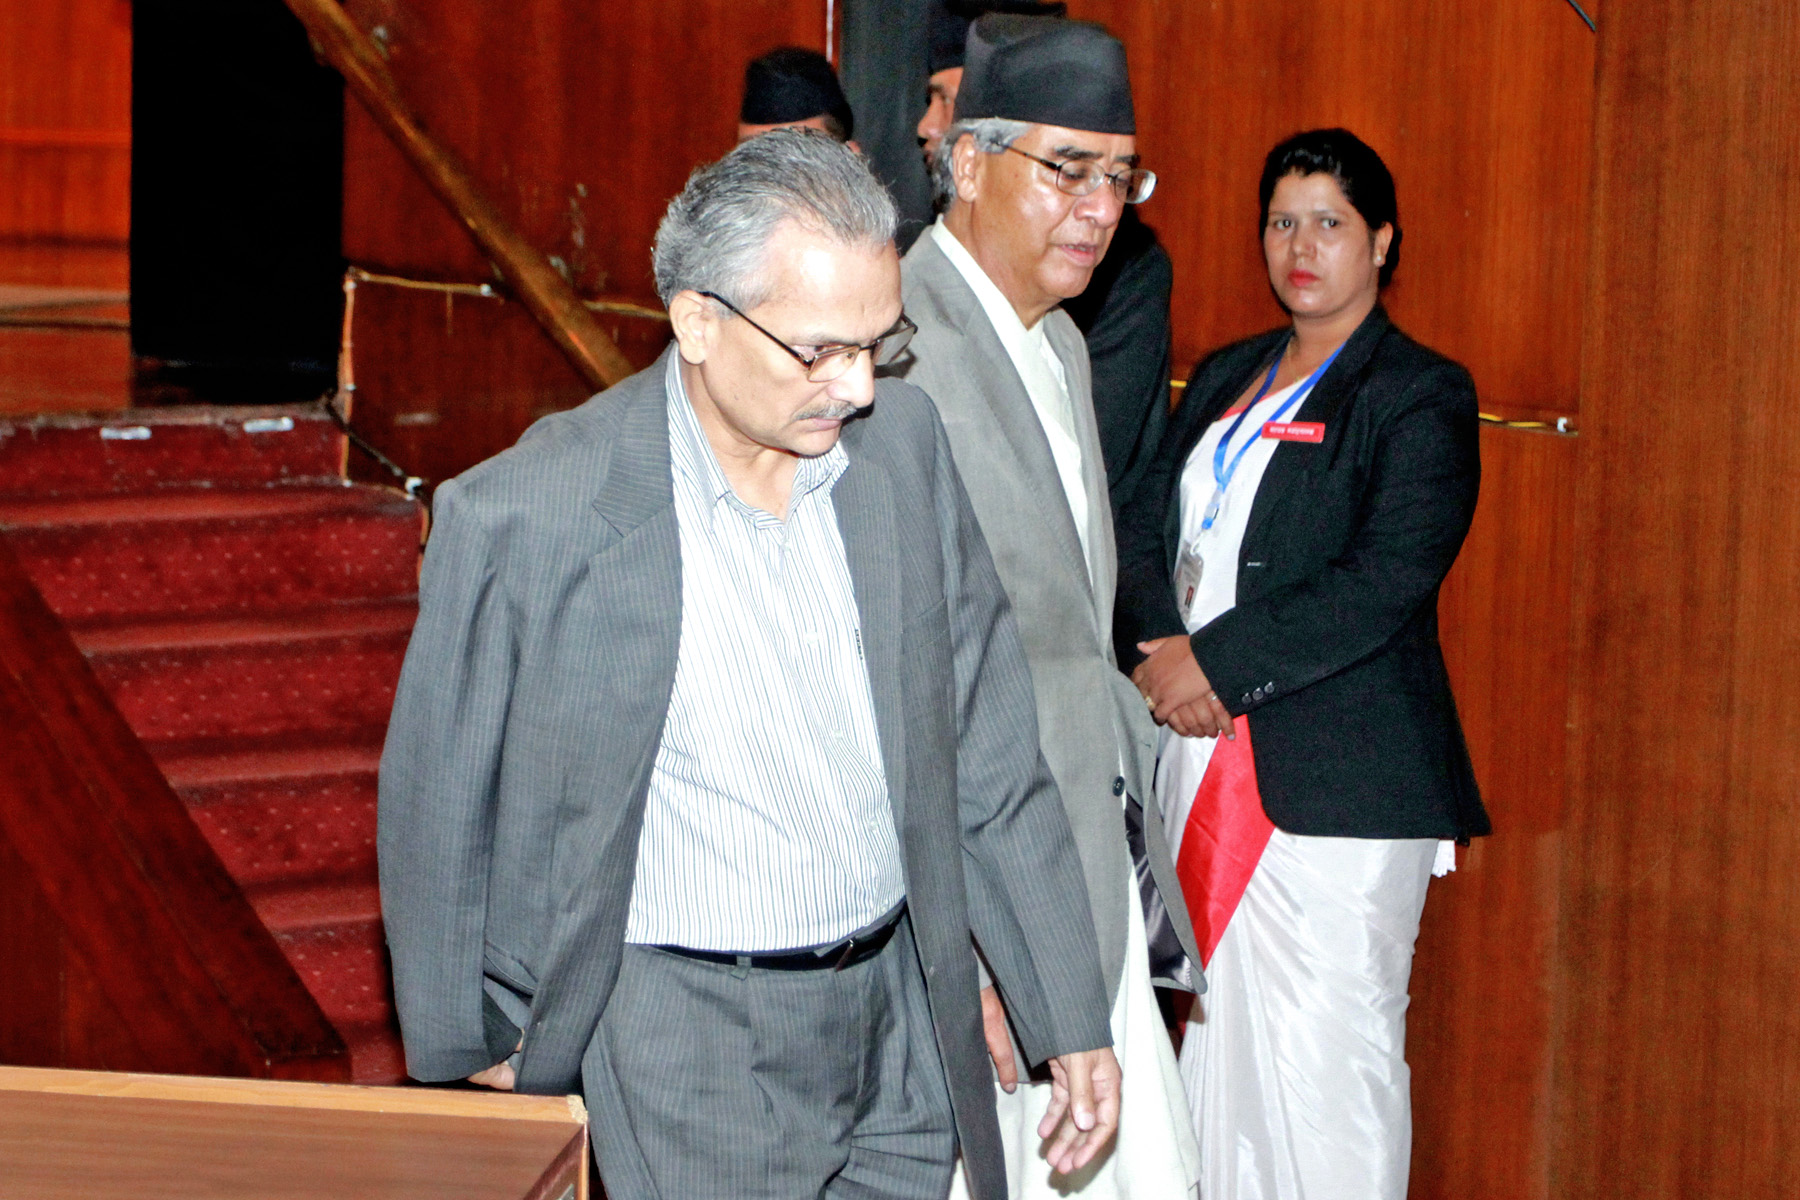 CPDCC Chair Baburam Bhattarai and Nepali Congress leader Sher Bahadur Deuba exiting the CA hall after the meeting concluded on Tuesday, August 11, 2015. Photo: RSS